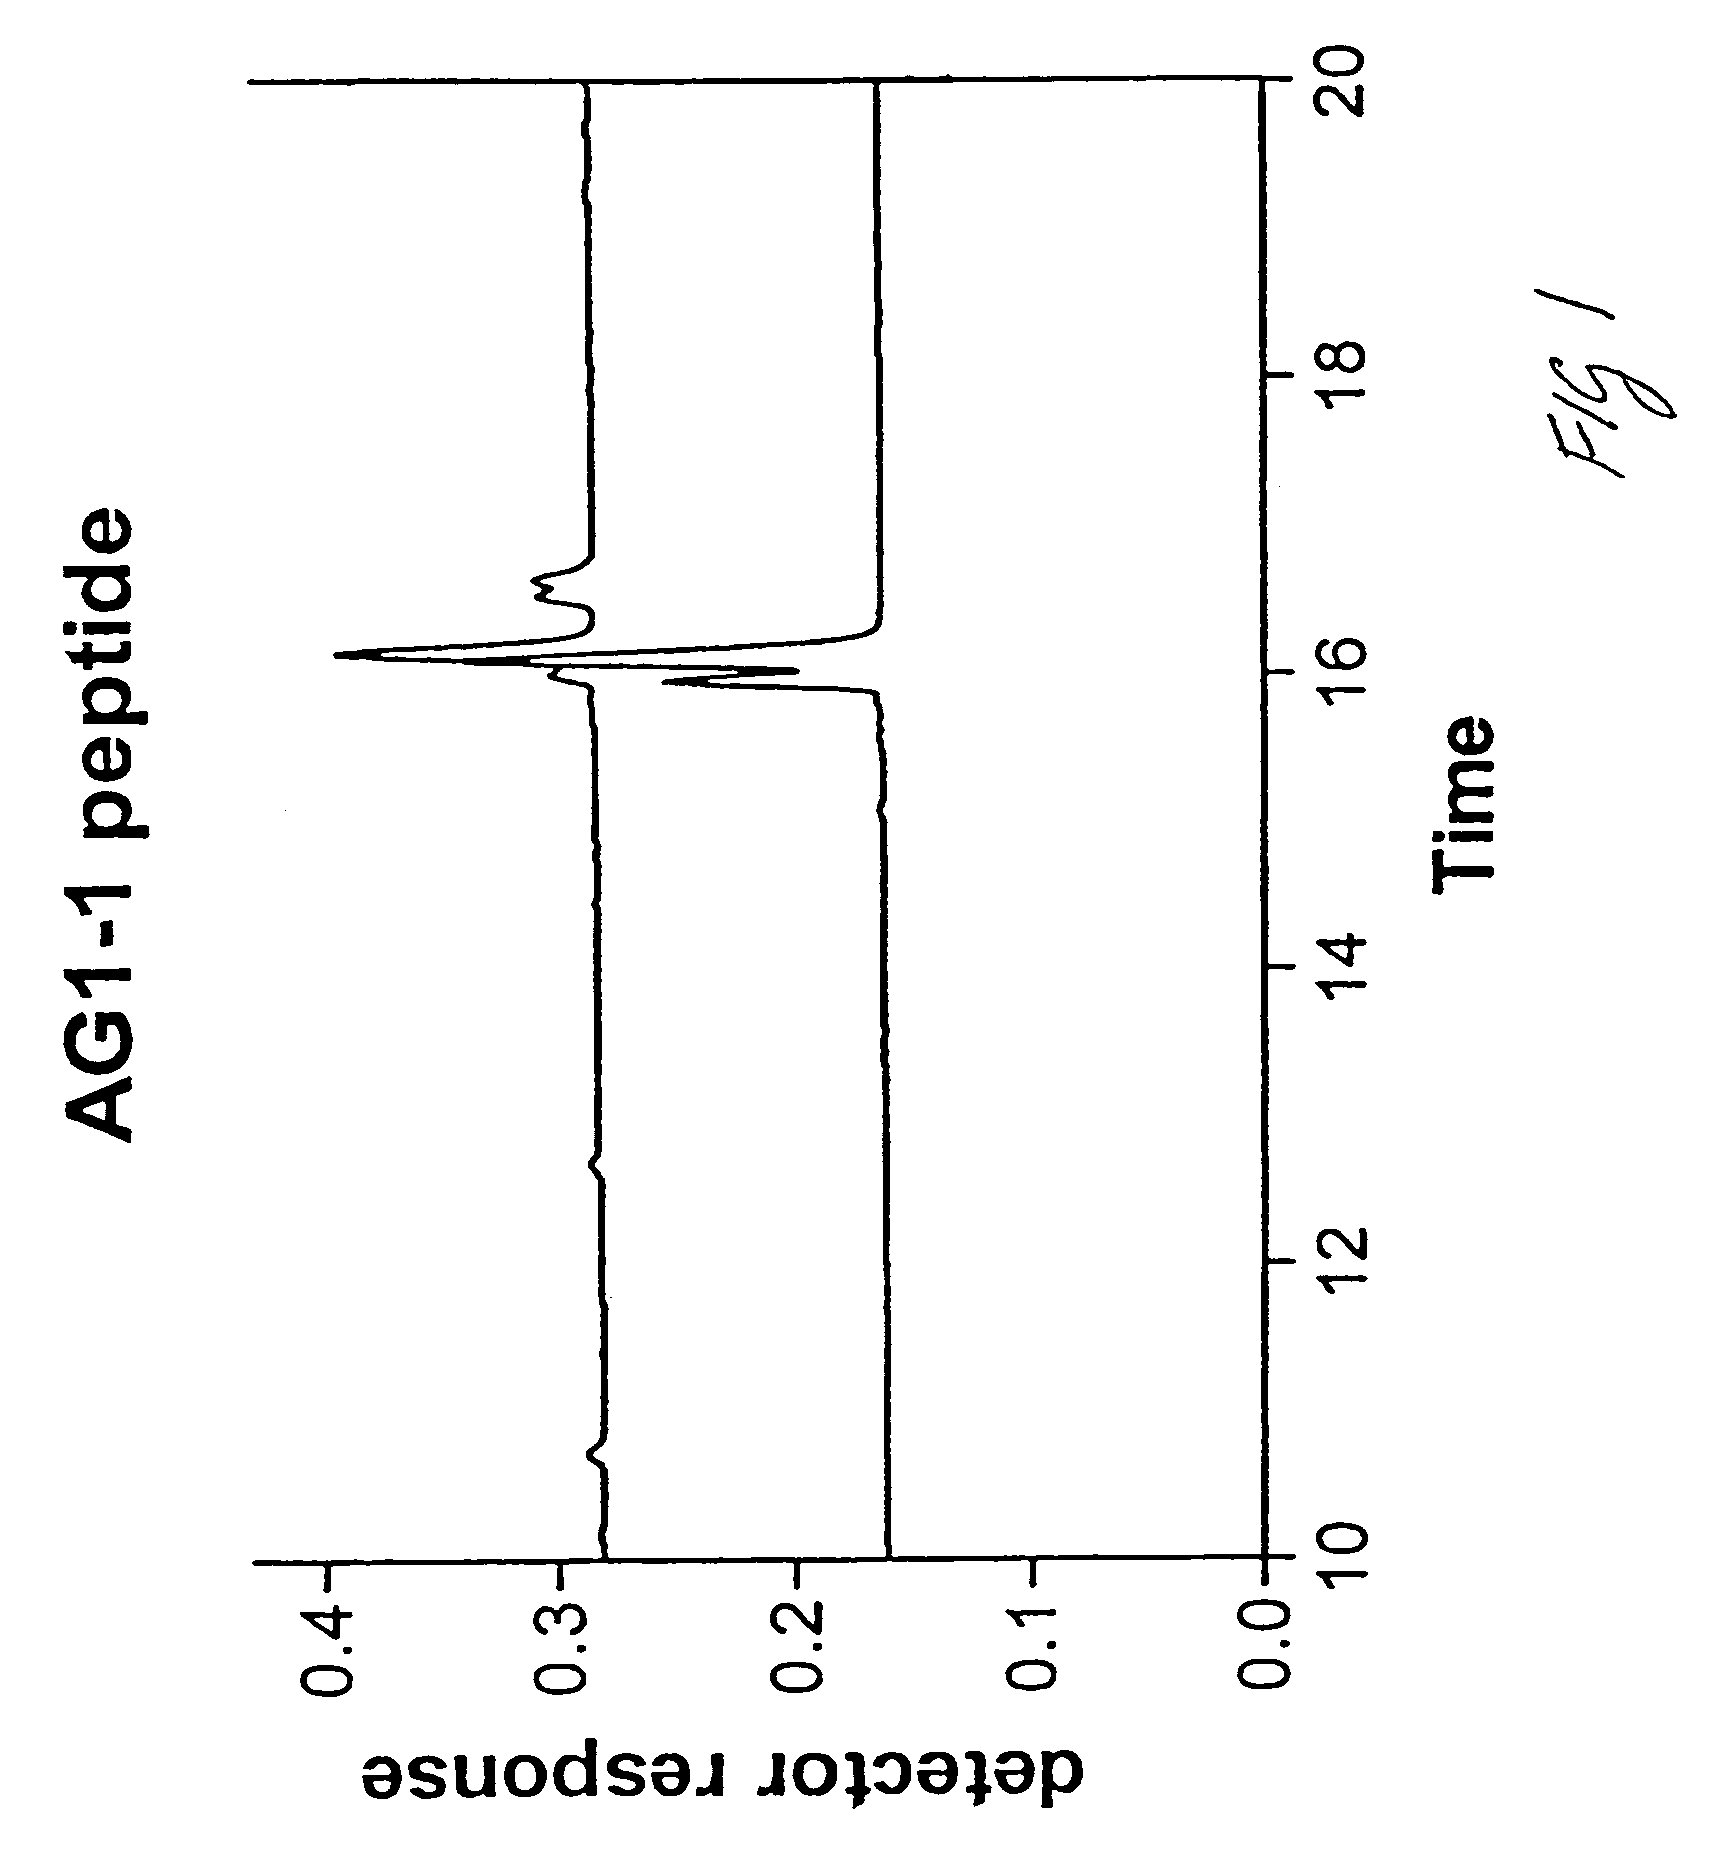 Assay of isomerised and/or optically inverted proteins and protein fragments